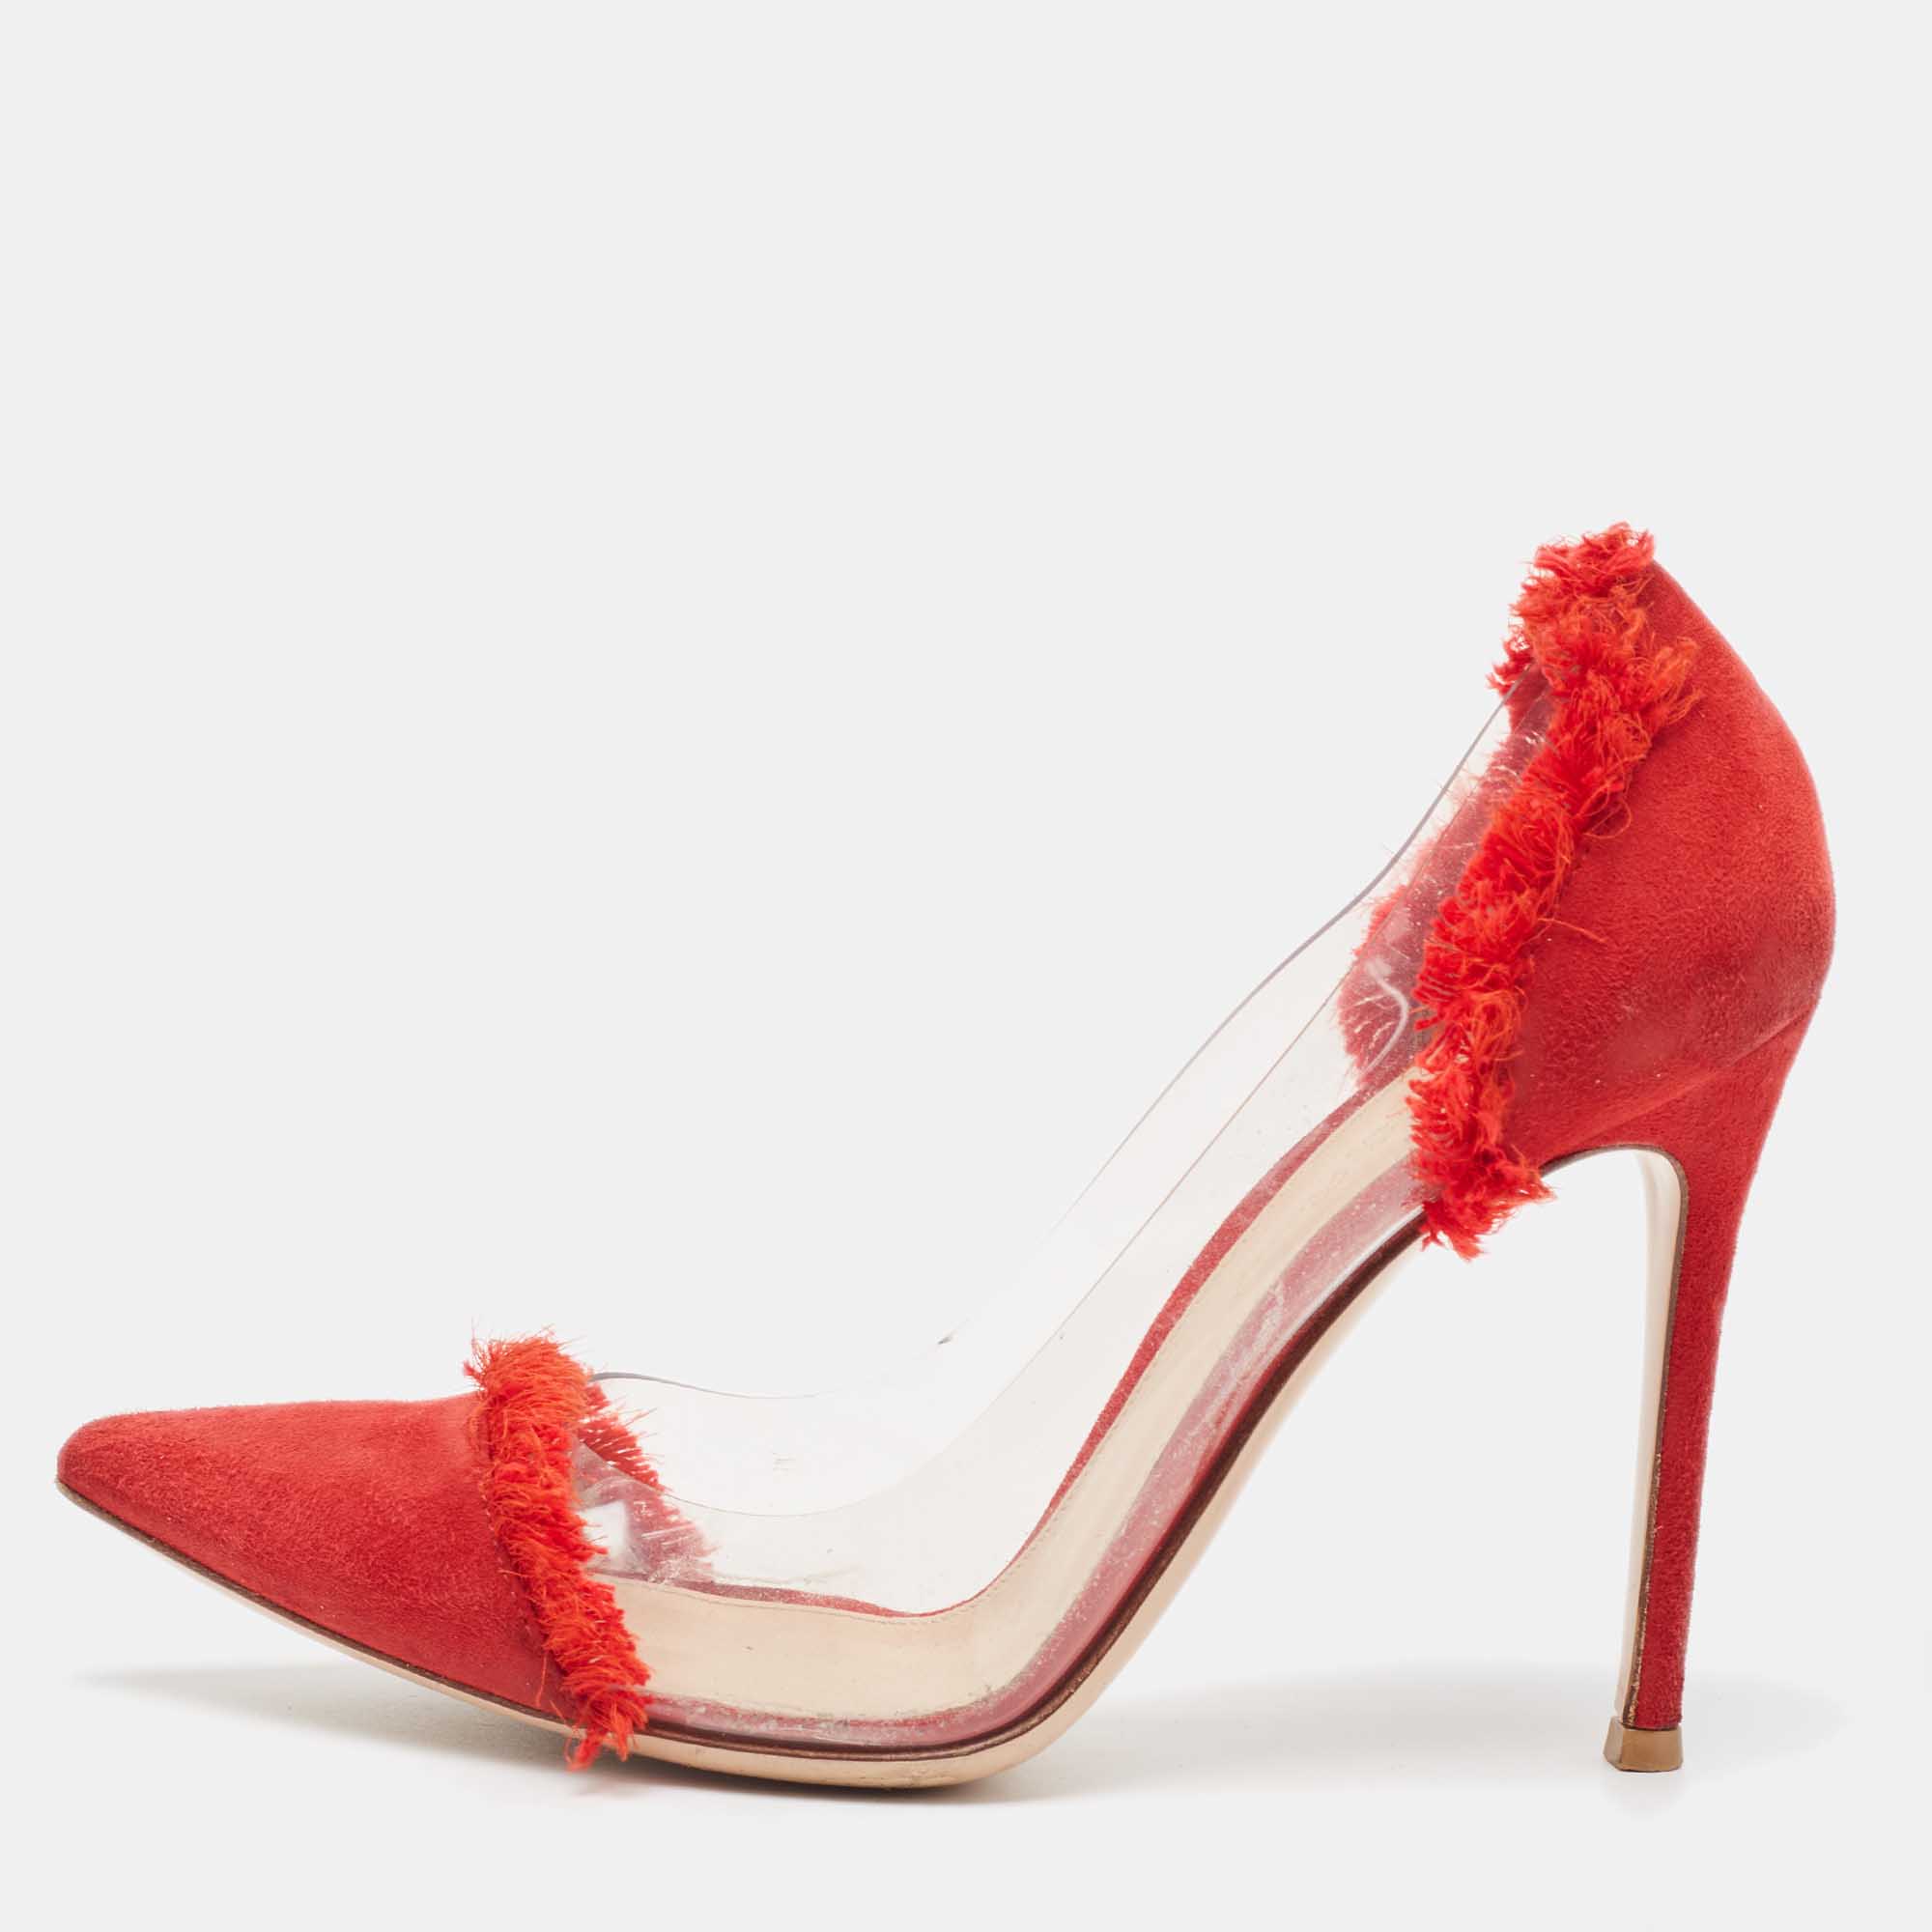 Gianvito rossi red suede and pvc plexi pumps size 37.5